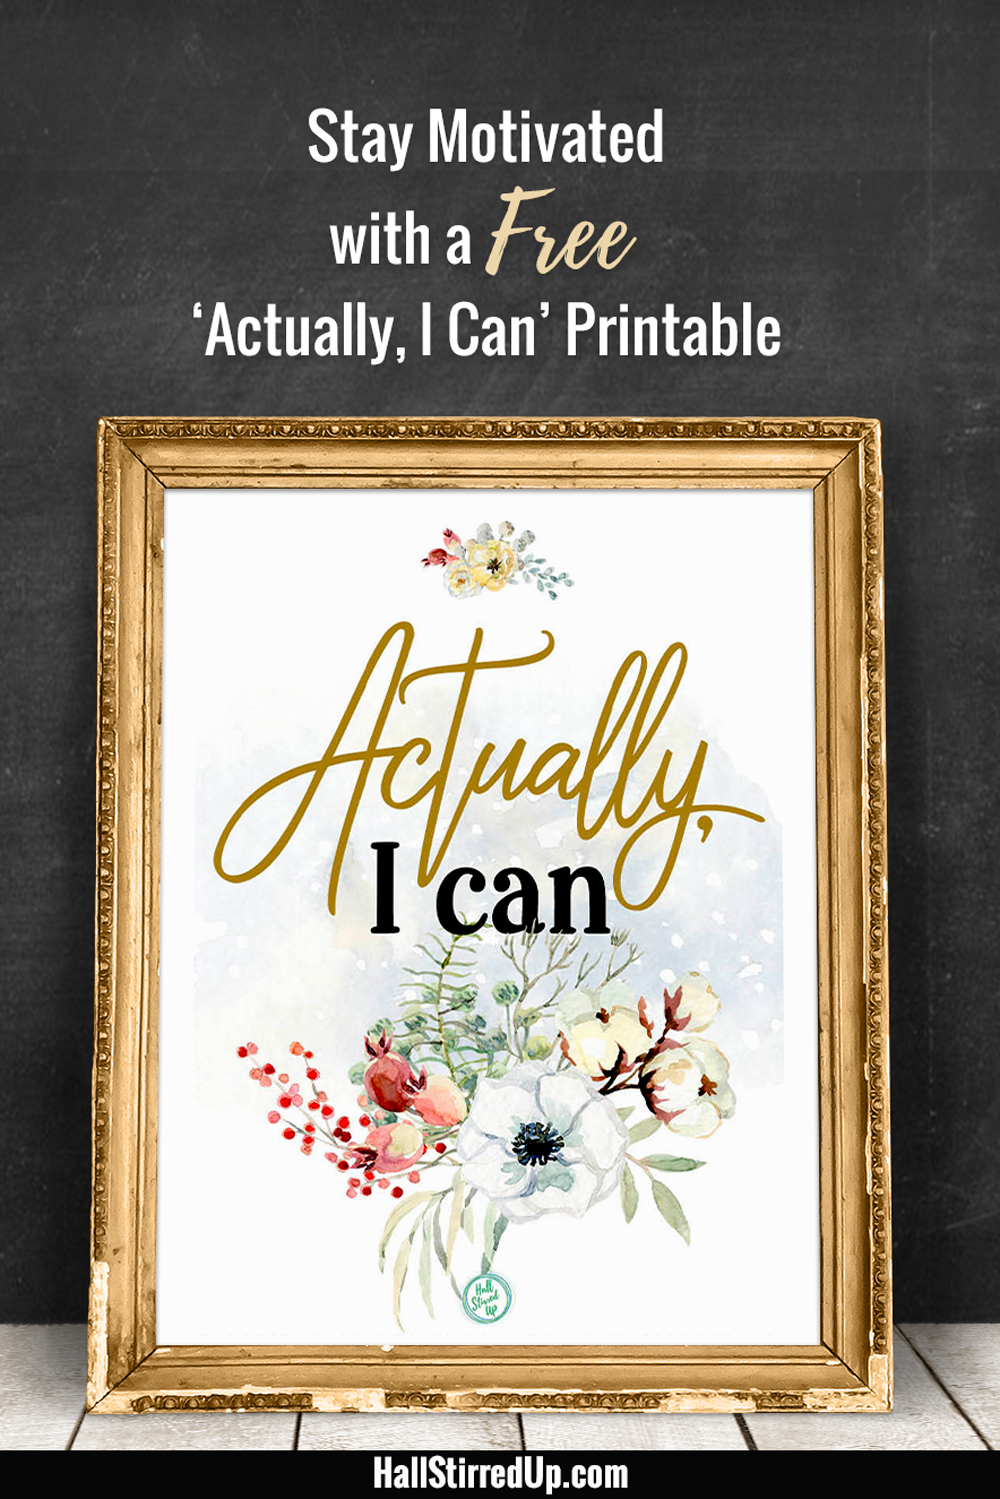 Stay motivated to meet your goals - includes printable